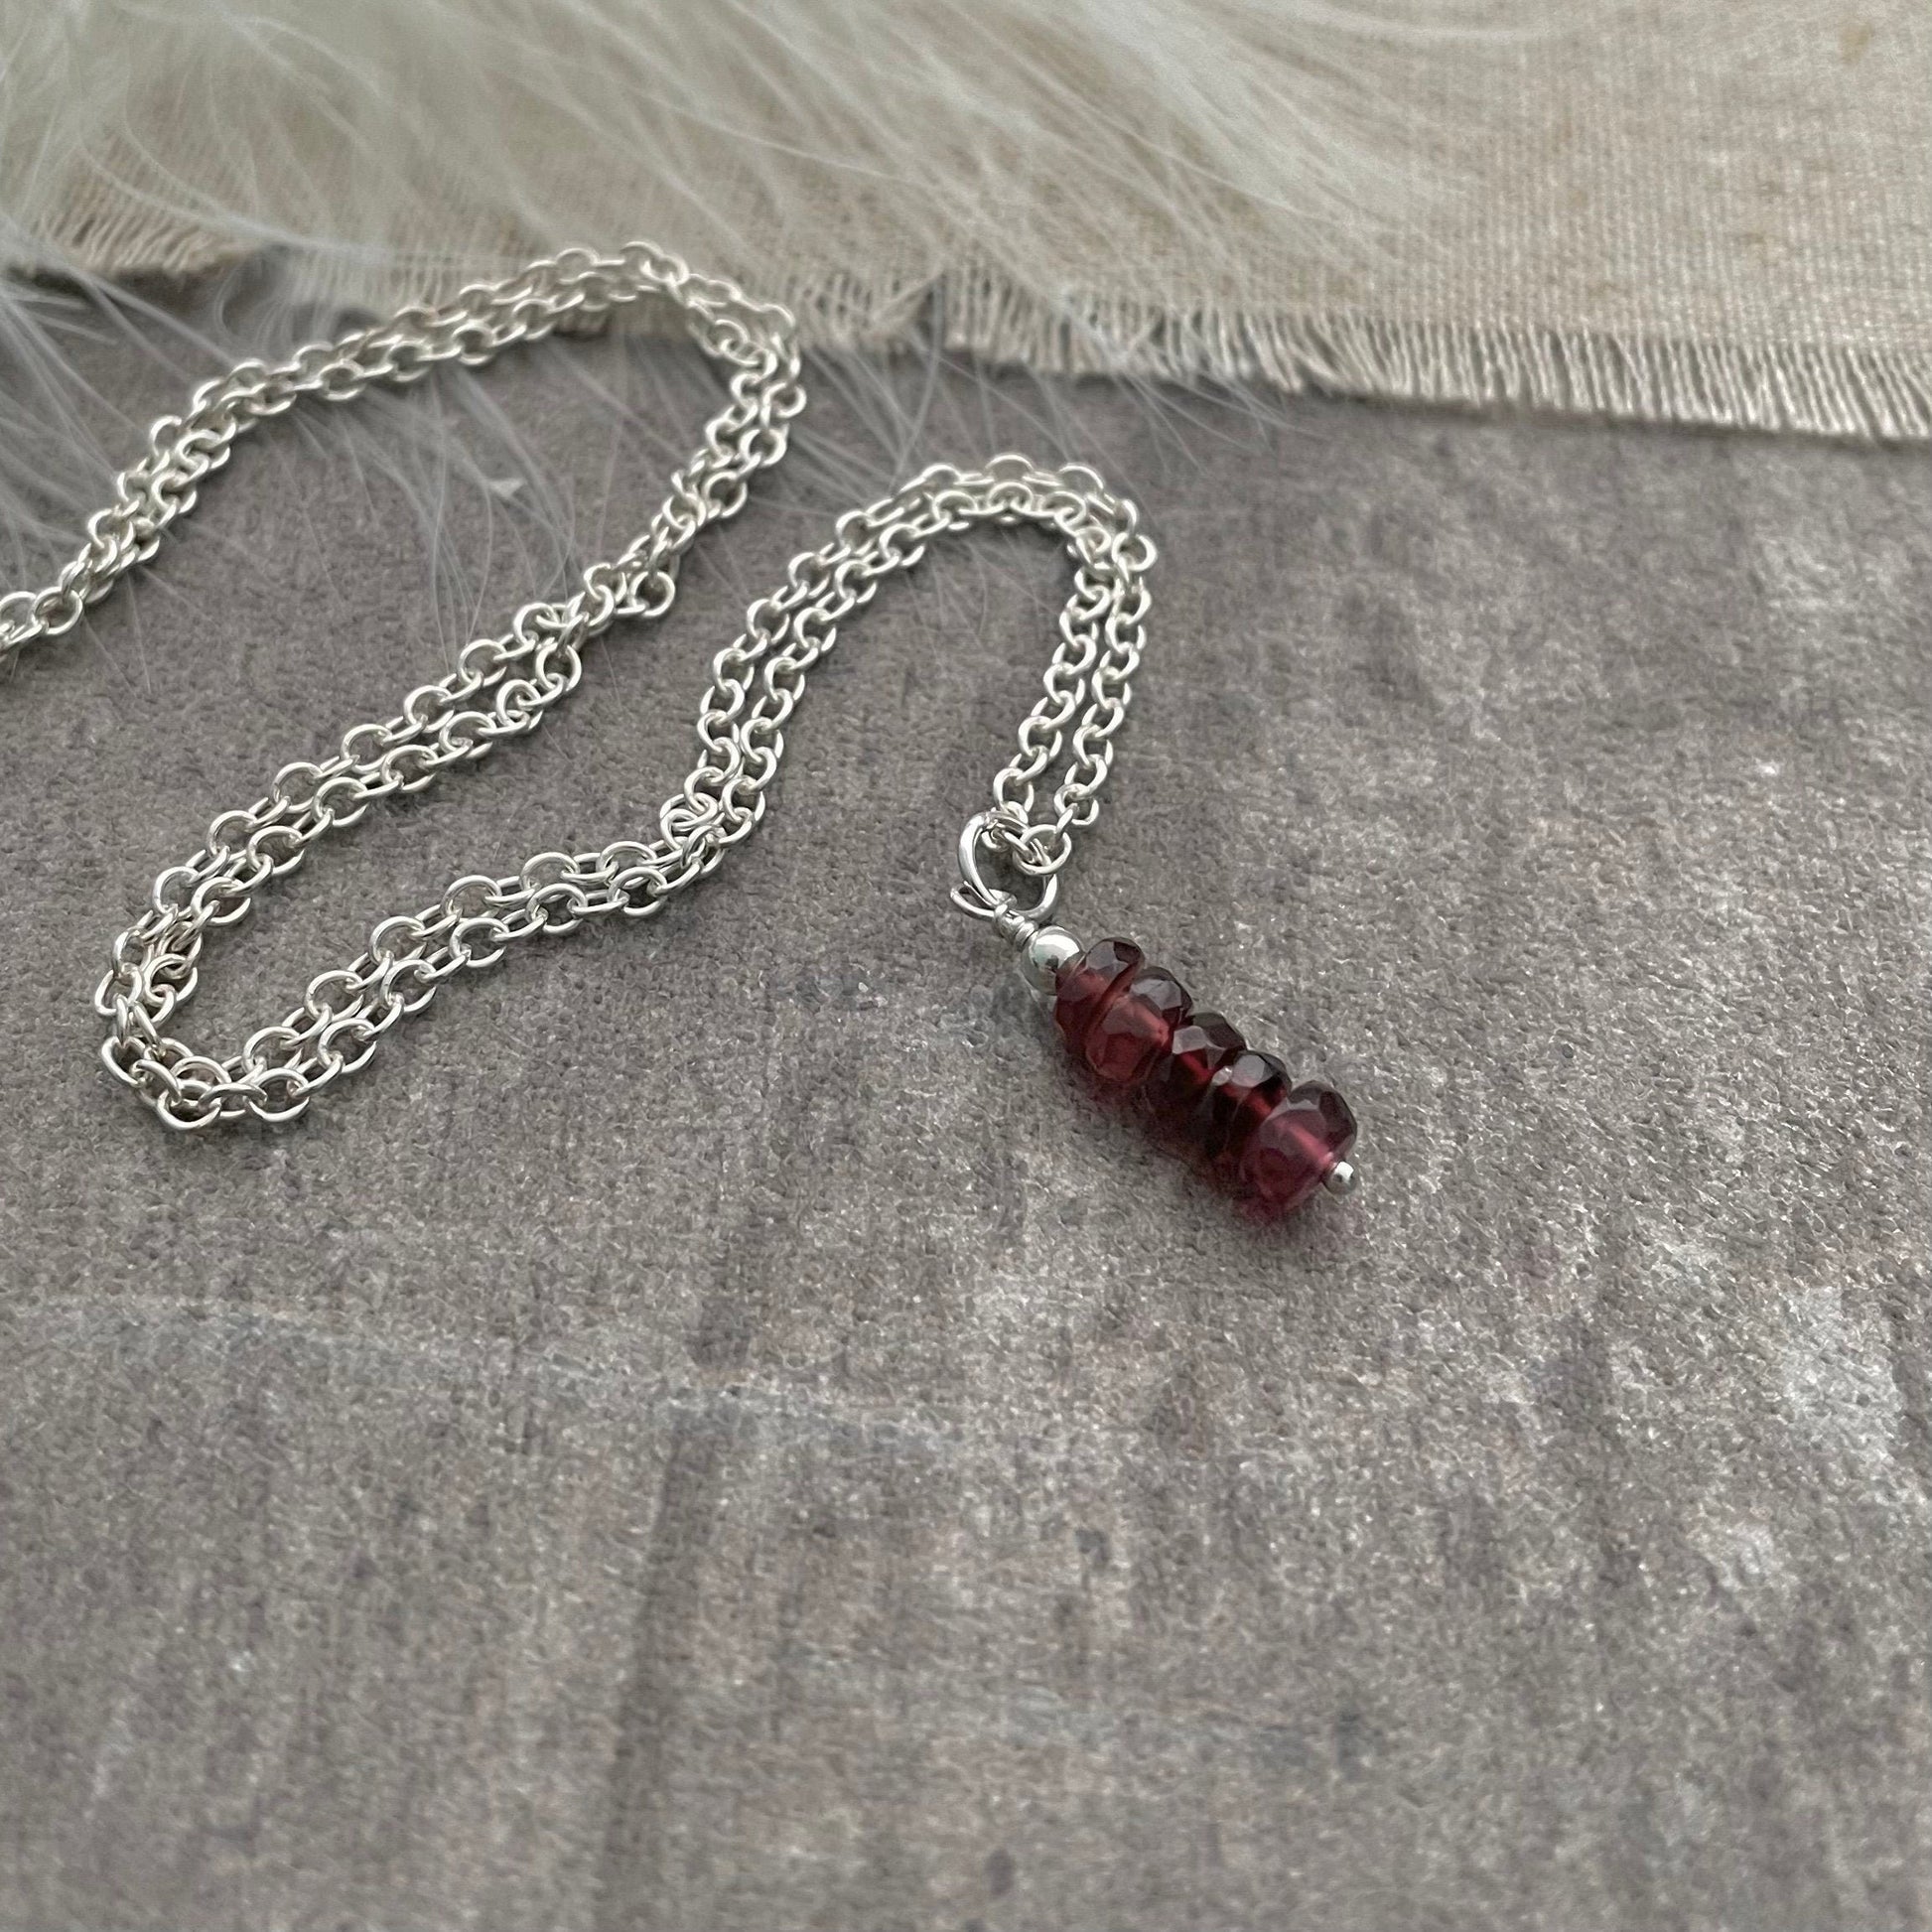 Dainty Garnet necklace, January birthstone, sterling silver faceted pendant gemstone necklace